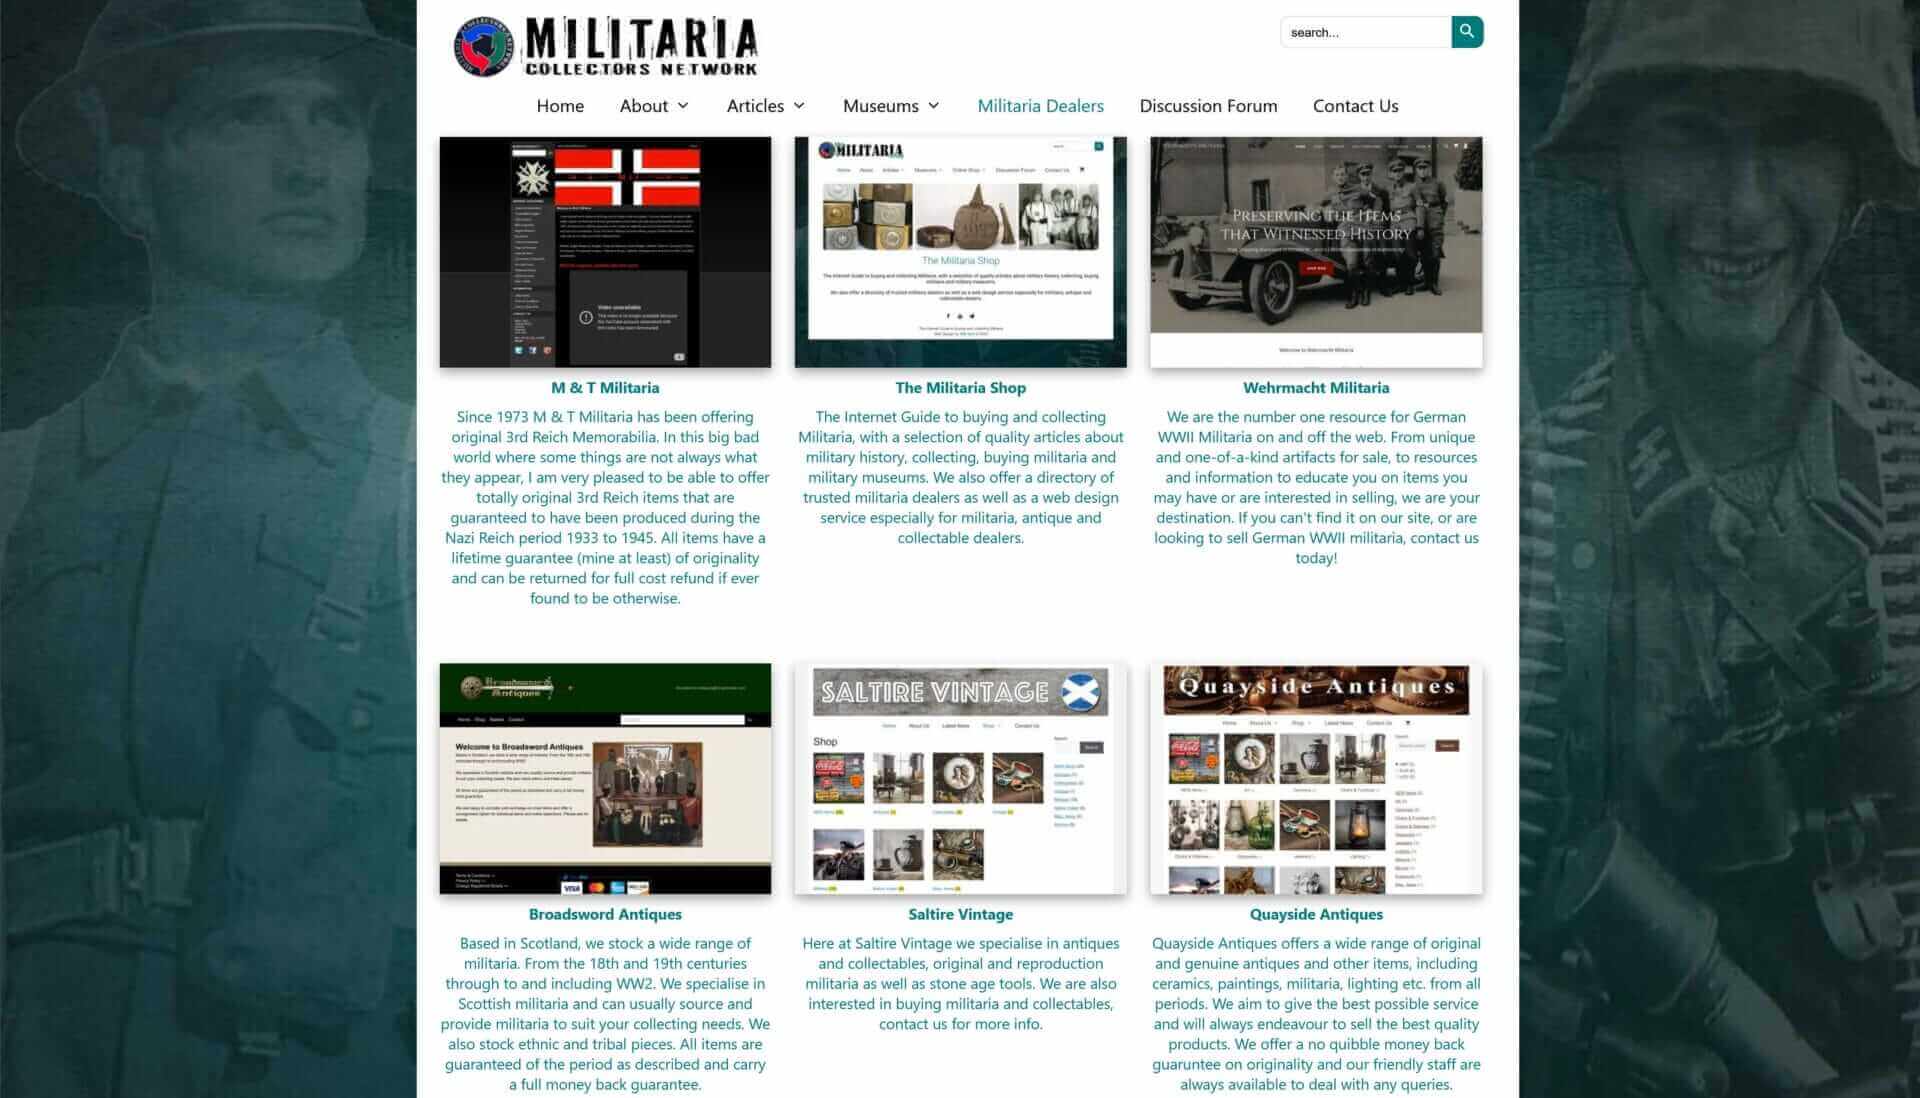 Militaria Collectors Network - The Internet Guide to buying and collecting Militaria.